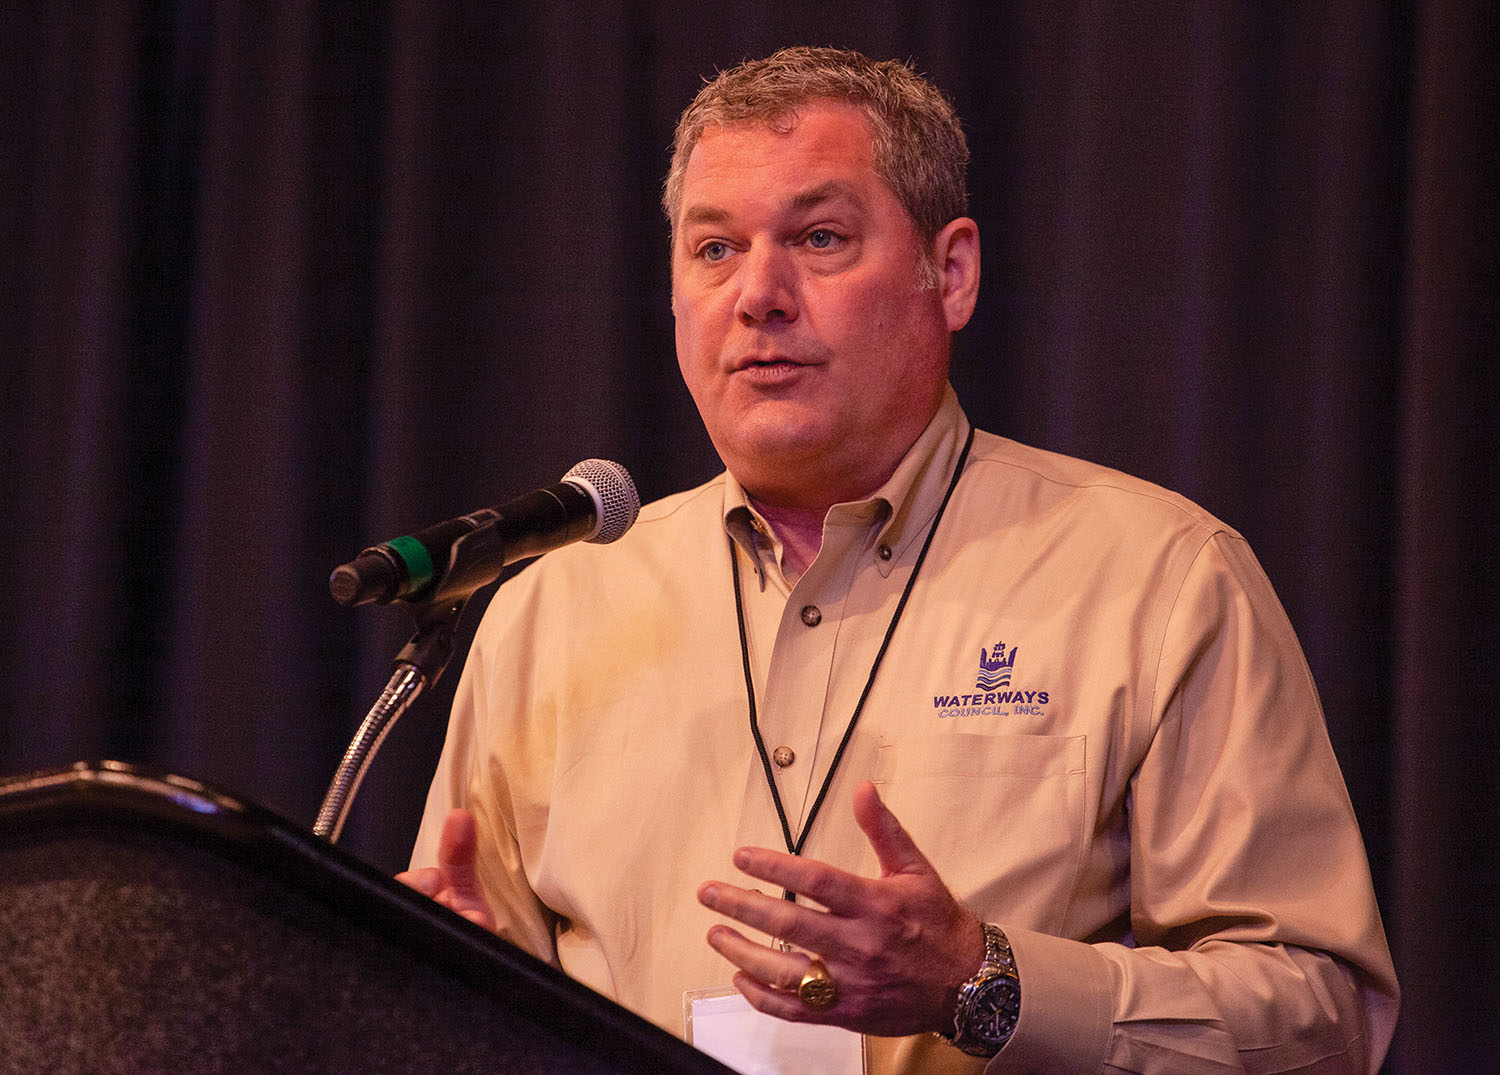 Paul Rohde, vice president-Midwest region for Waterways Council Inc., speaks during the Inland Marine Expo May 26 in St. Louis. (Photo by Frank McCormack)